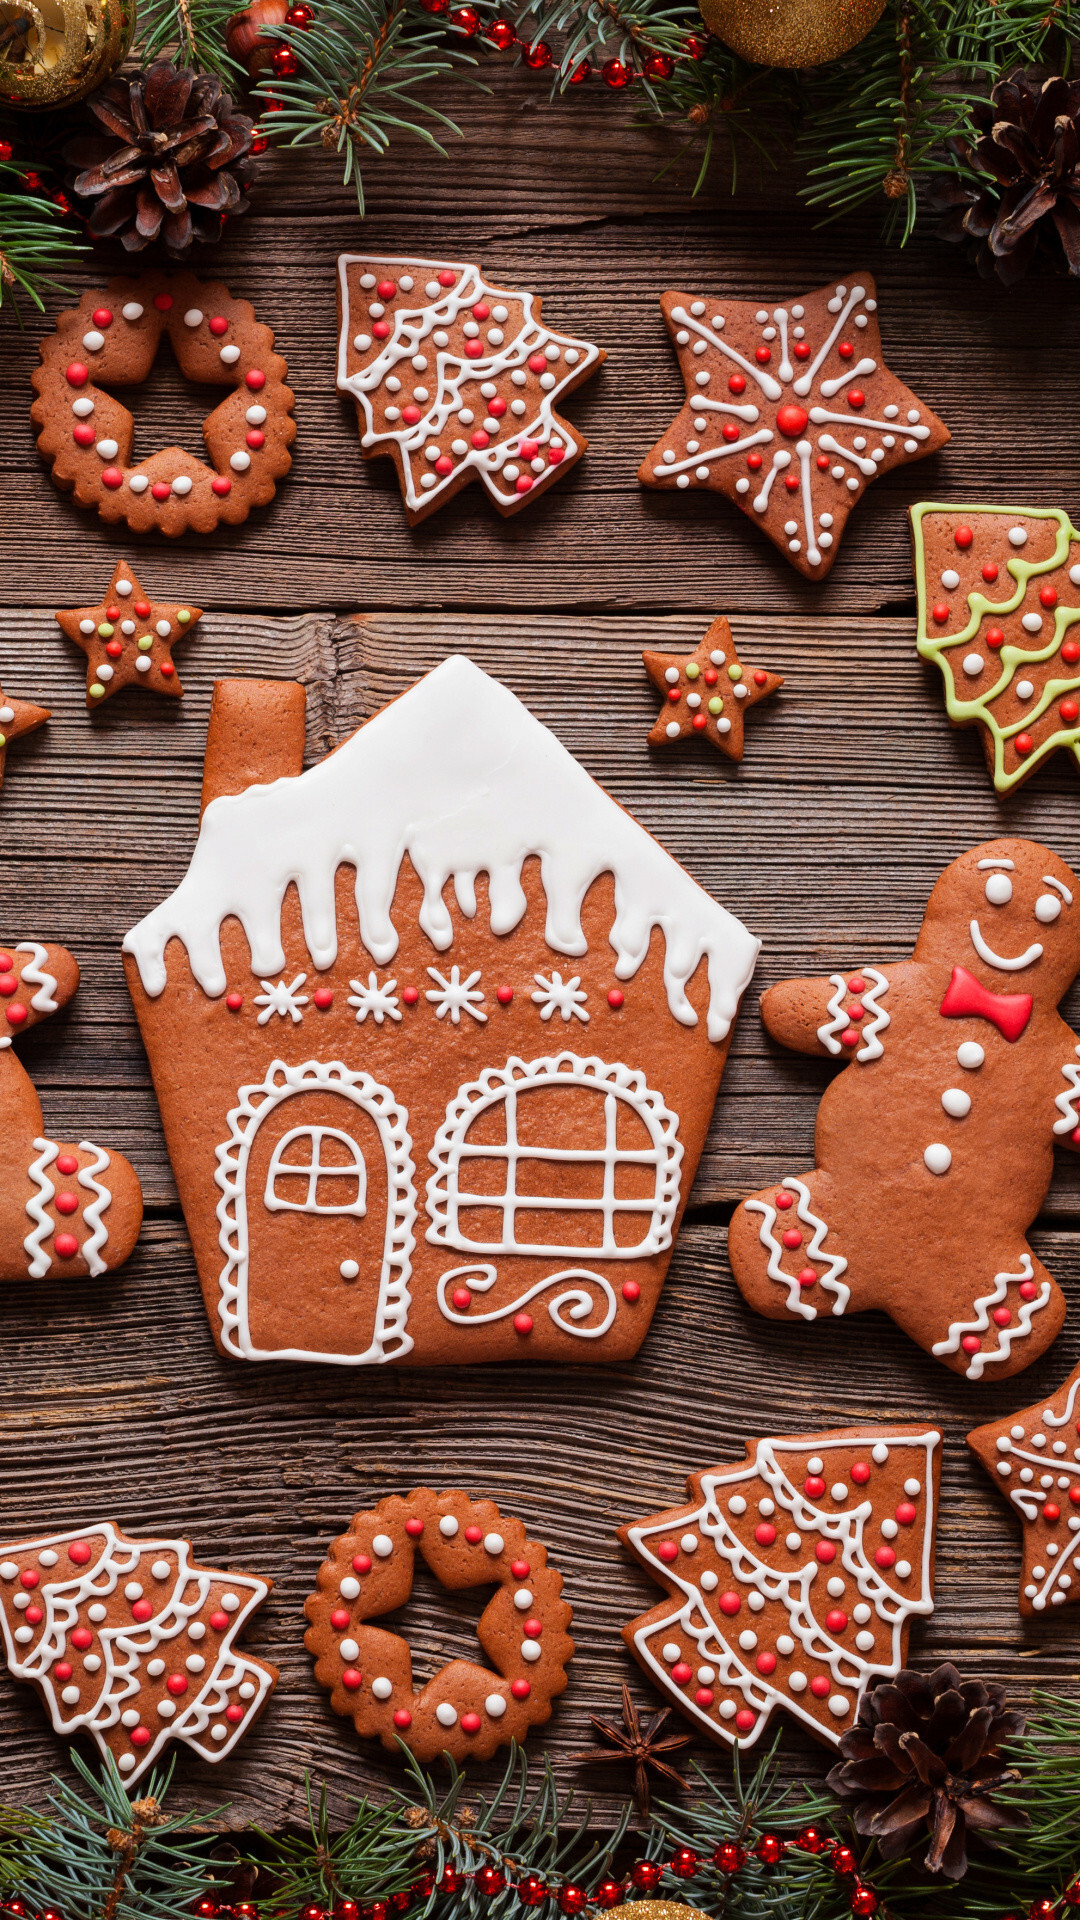 Gingerbread House: Melt-in-the-mouth gourmet ginger cookies, Icing decorations, Christmas tree, Snowflakes. 1080x1920 Full HD Wallpaper.